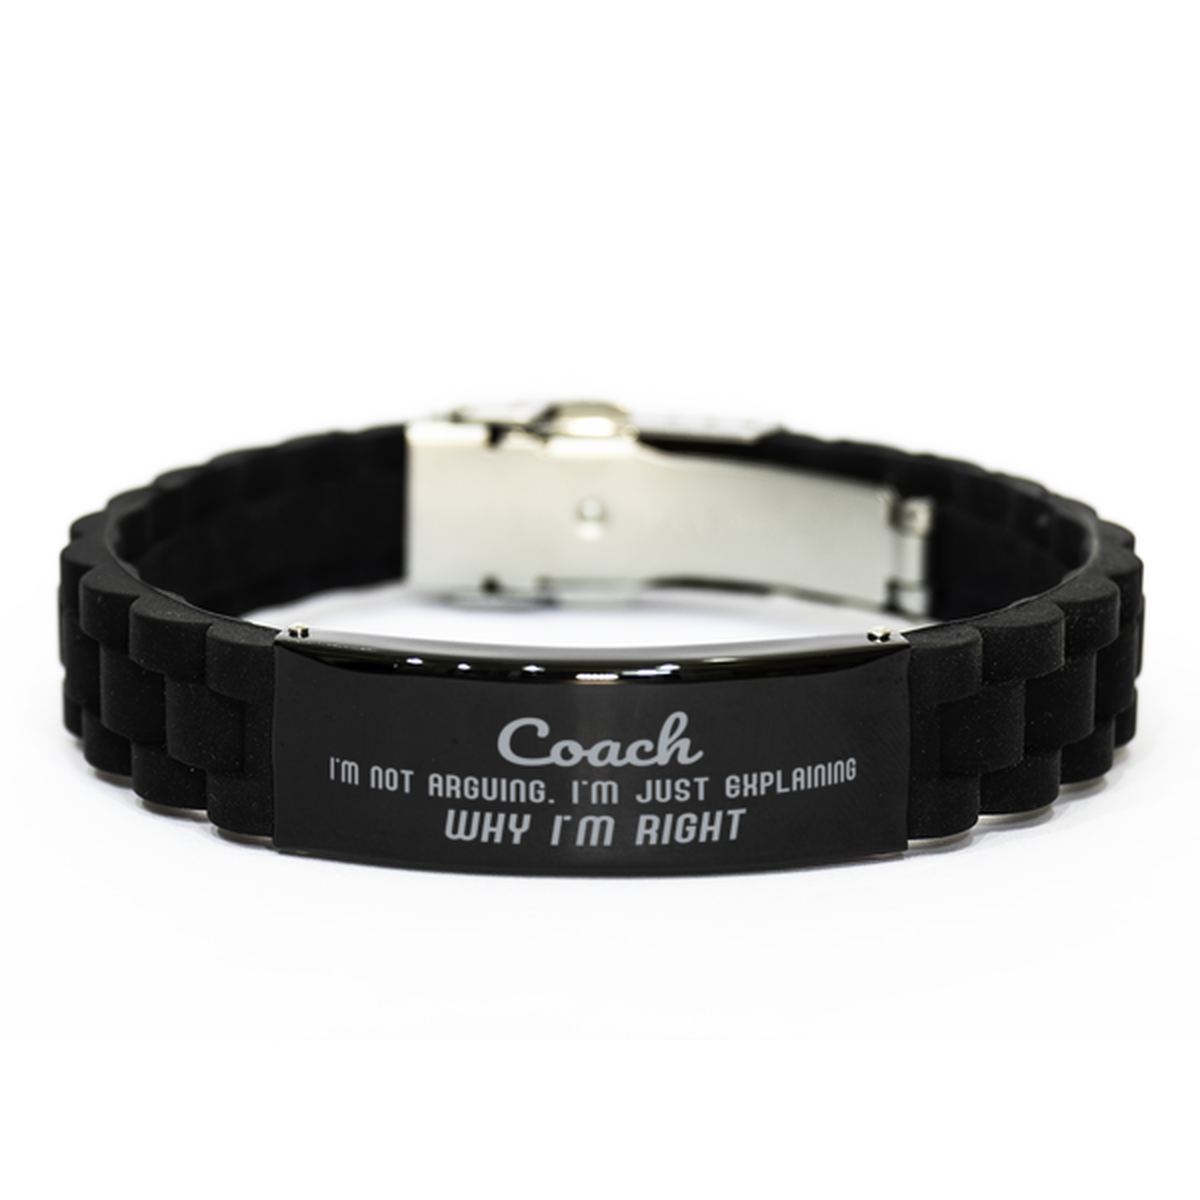 Coach I'm not Arguing. I'm Just Explaining Why I'm RIGHT Black Glidelock Clasp Bracelet, Funny Saying Quote Coach Gifts For Coach Graduation Birthday Christmas Gifts for Men Women Coworker